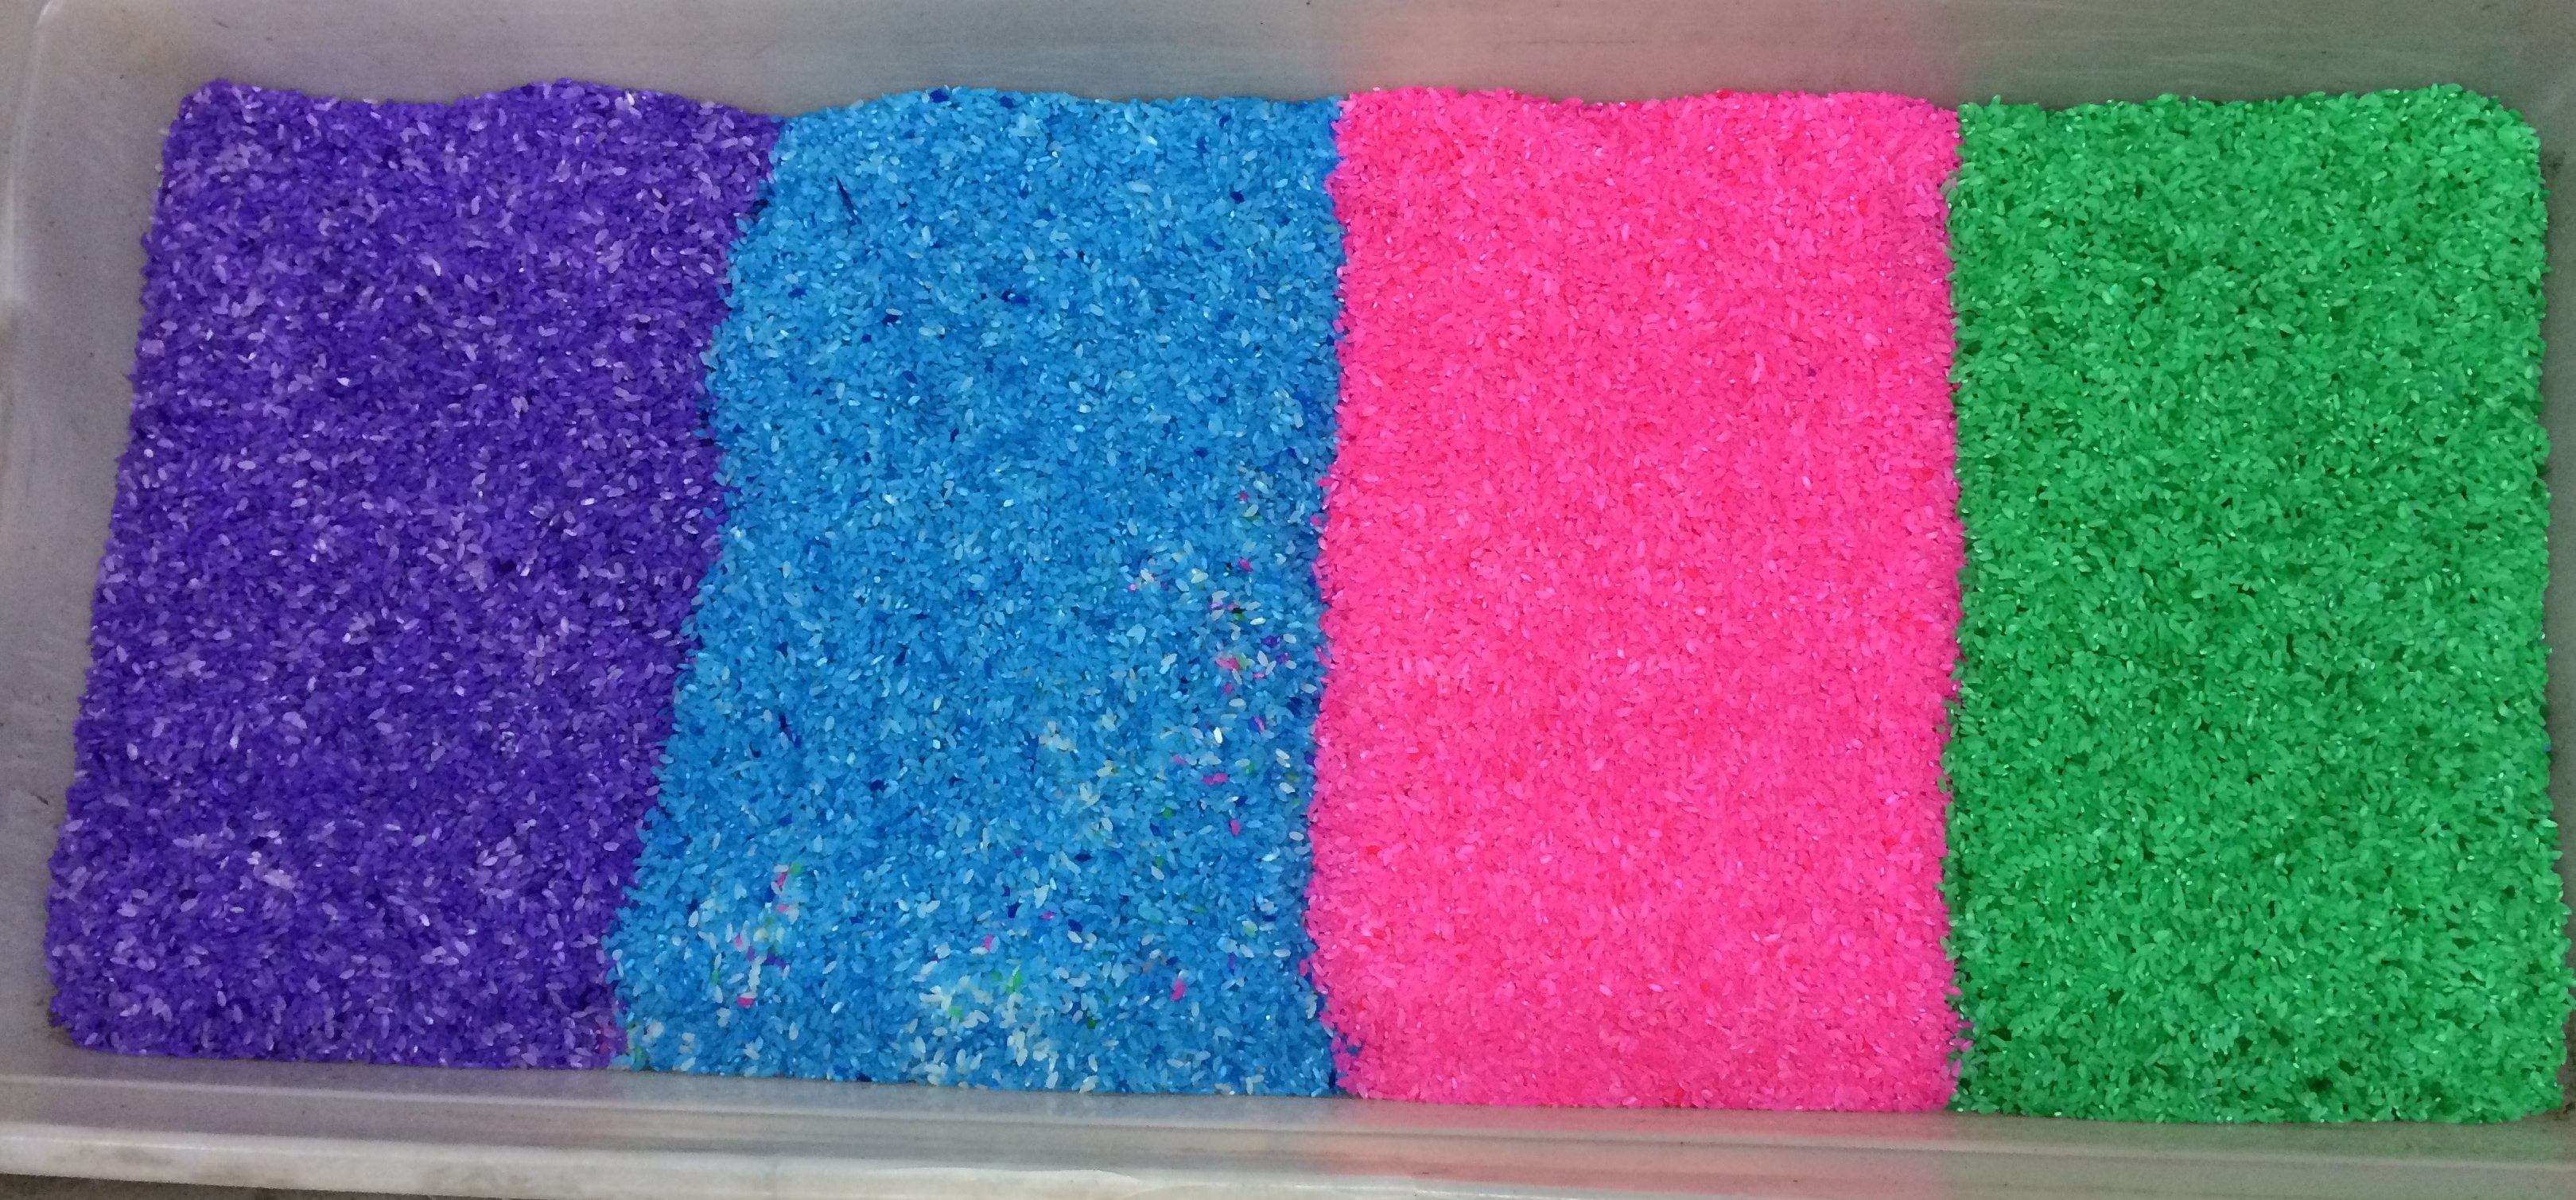 Dyed Rice for Sensory Play, Art, and More